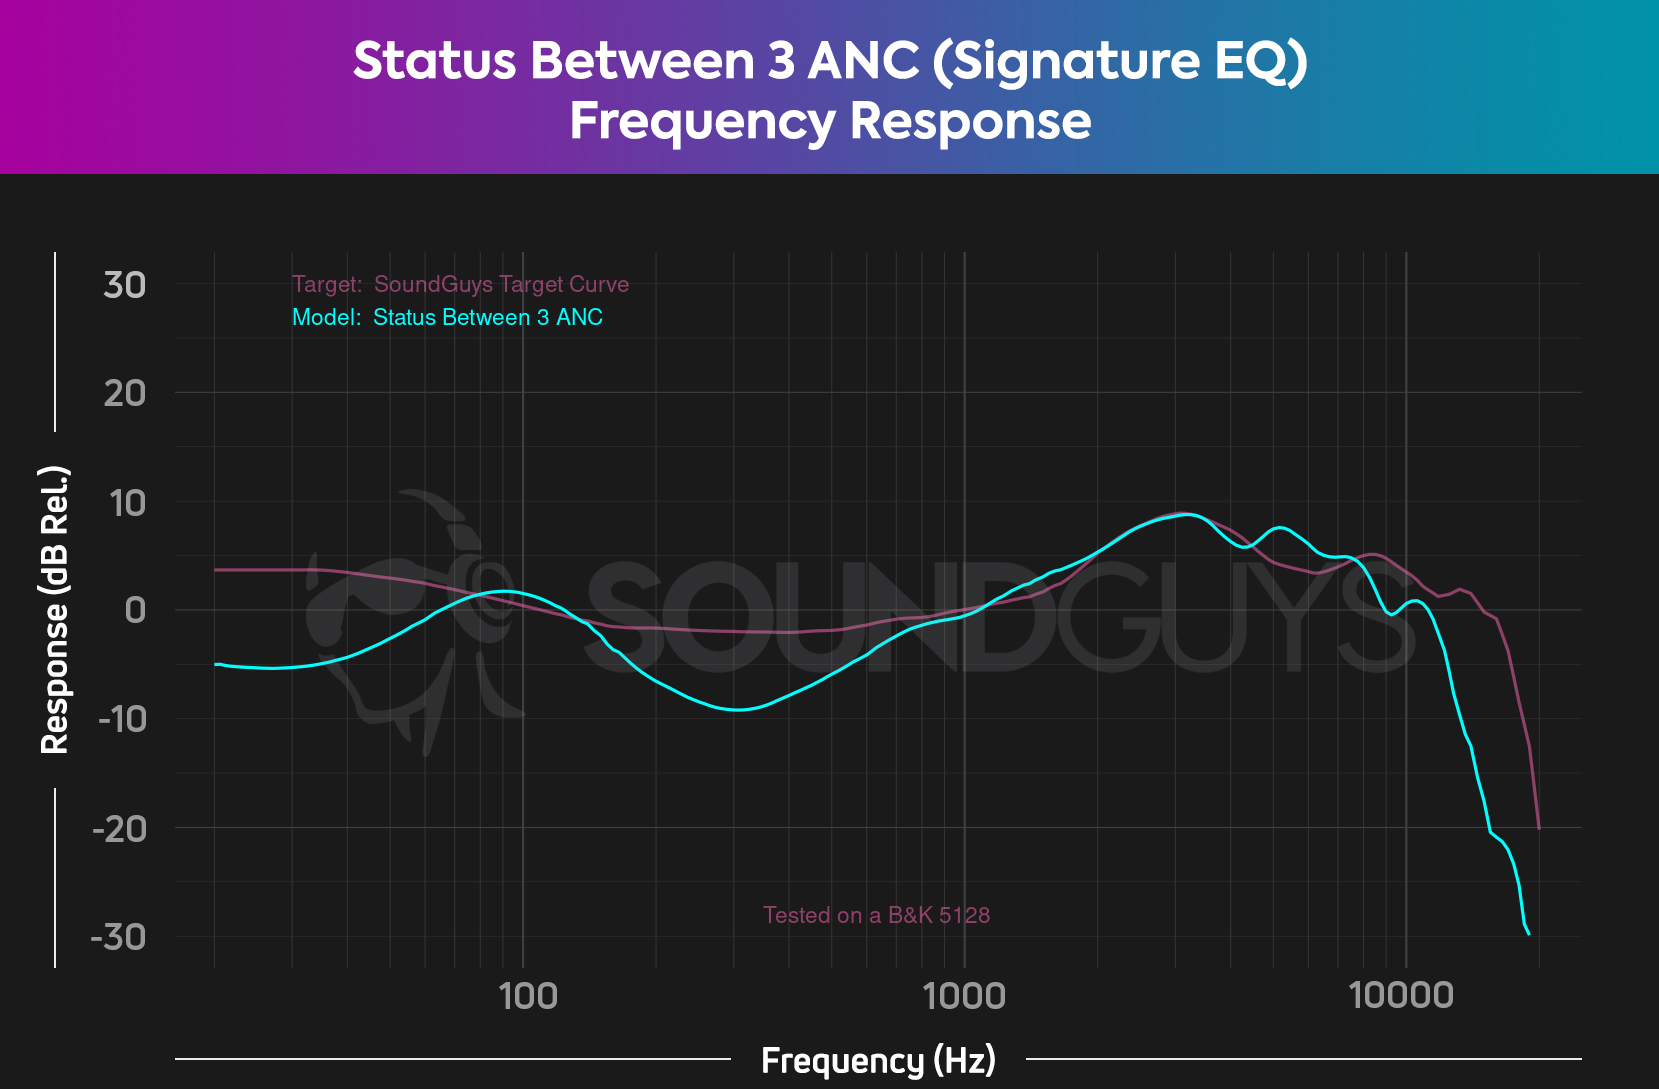 The frequency response of the Status Between 3 ANC with the Signature EQ setting compared to our target curve.